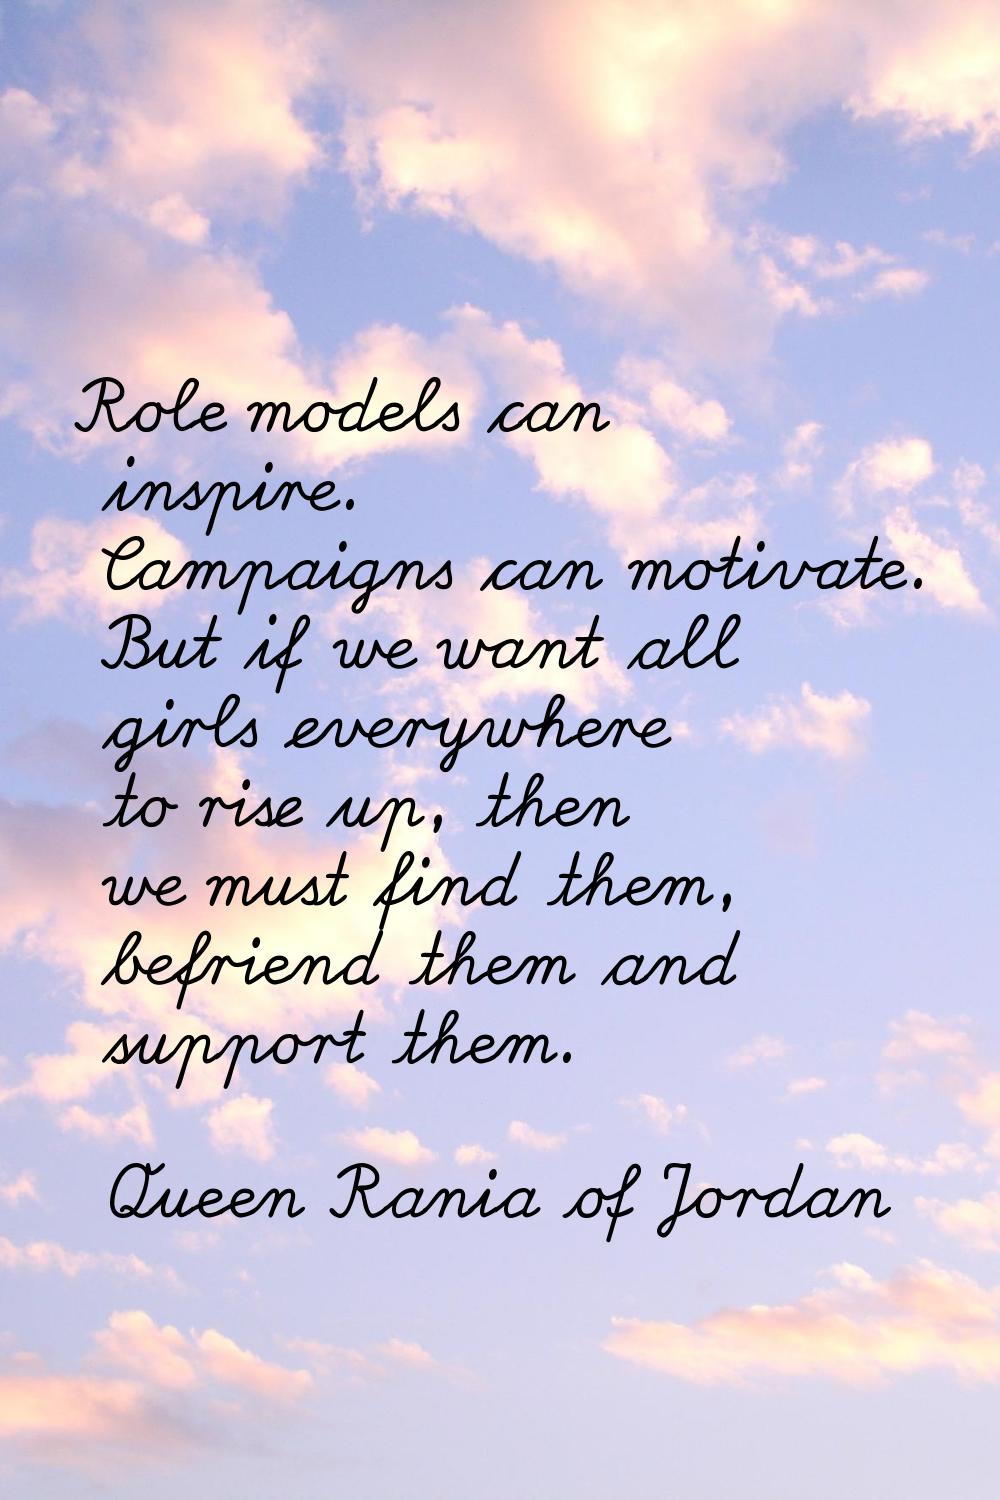 Role models can inspire. Campaigns can motivate. But if we want all girls everywhere to rise up, th